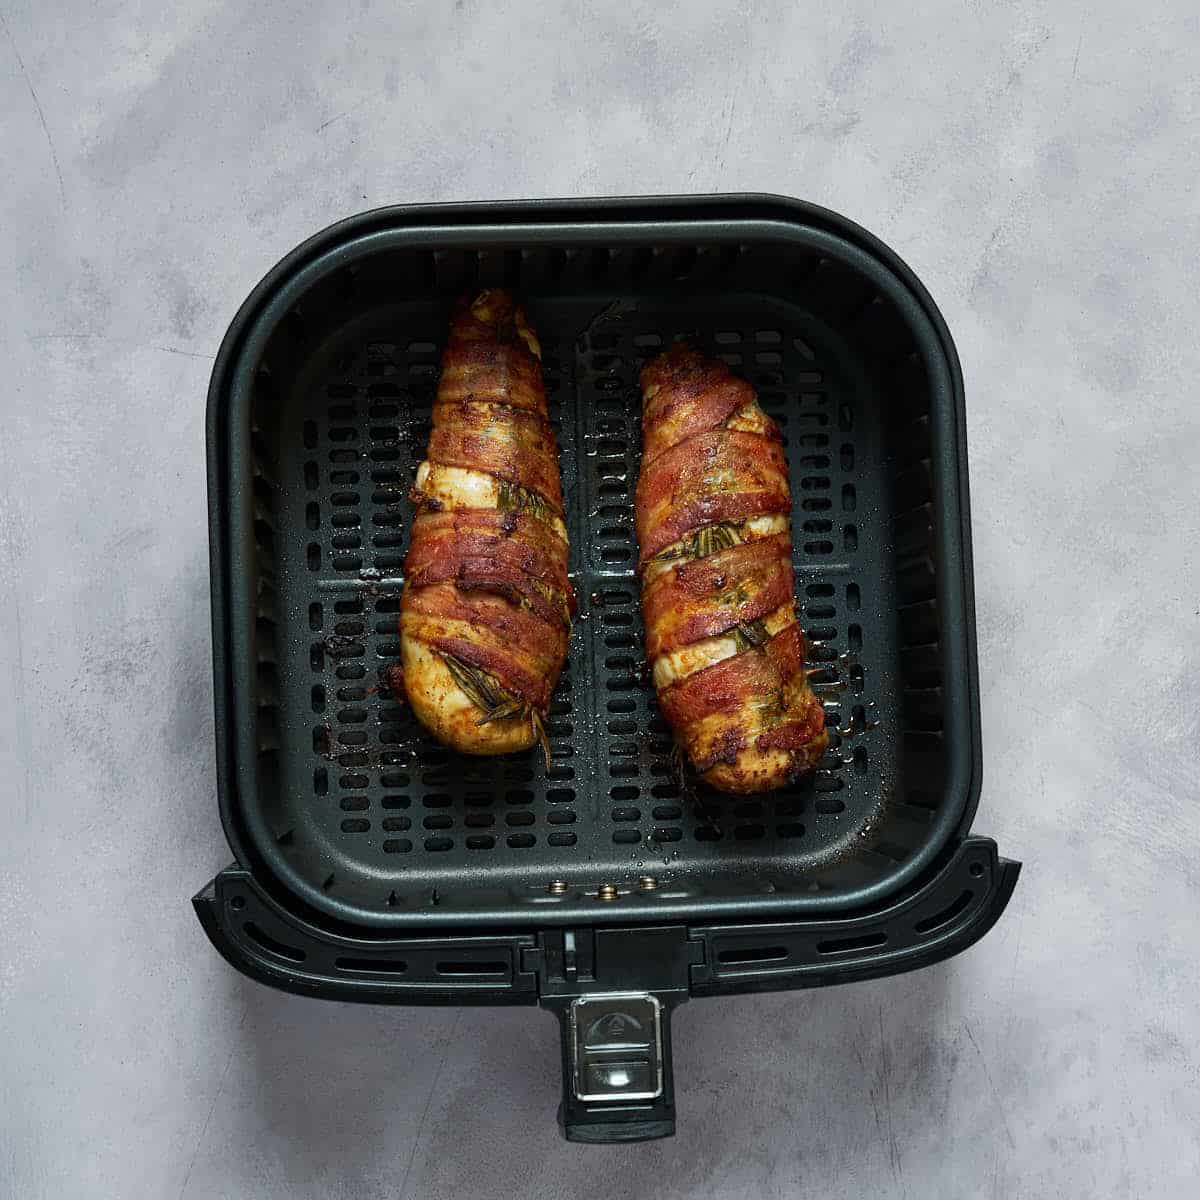 Cooked bacon wrapped chicken breasts in the air fryer basket.